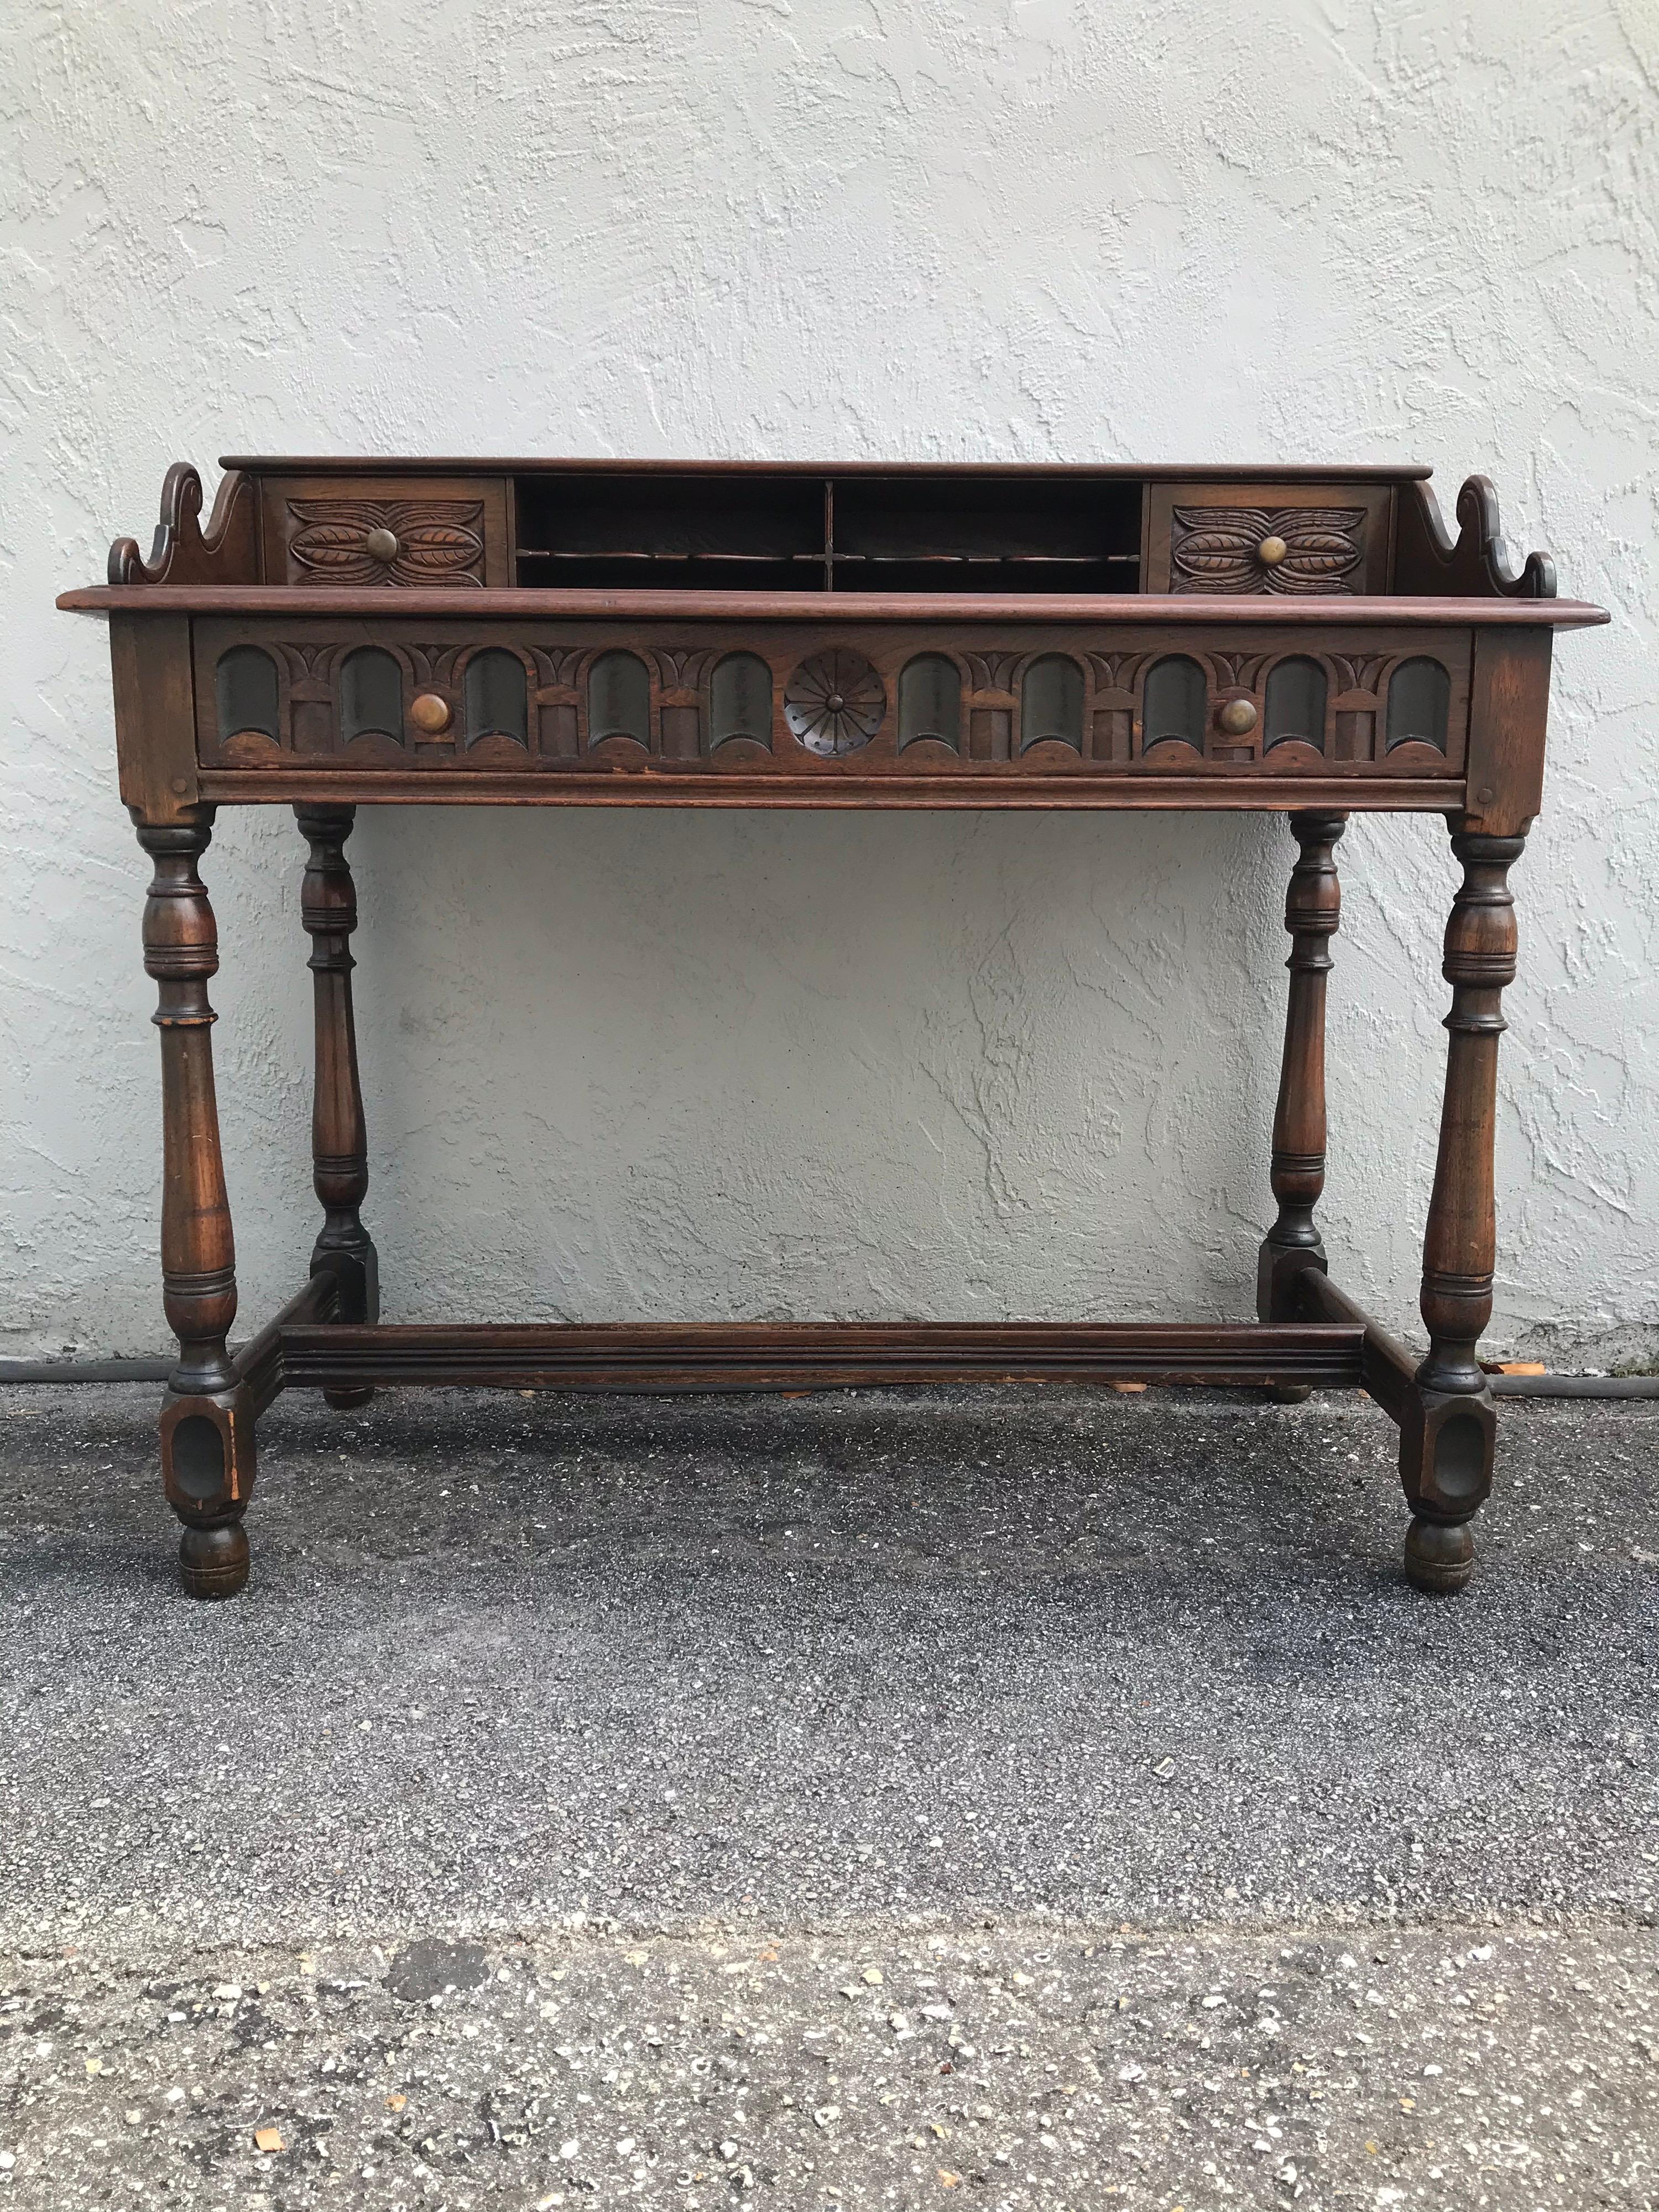 English Arts & Crafts Style Carved Desk